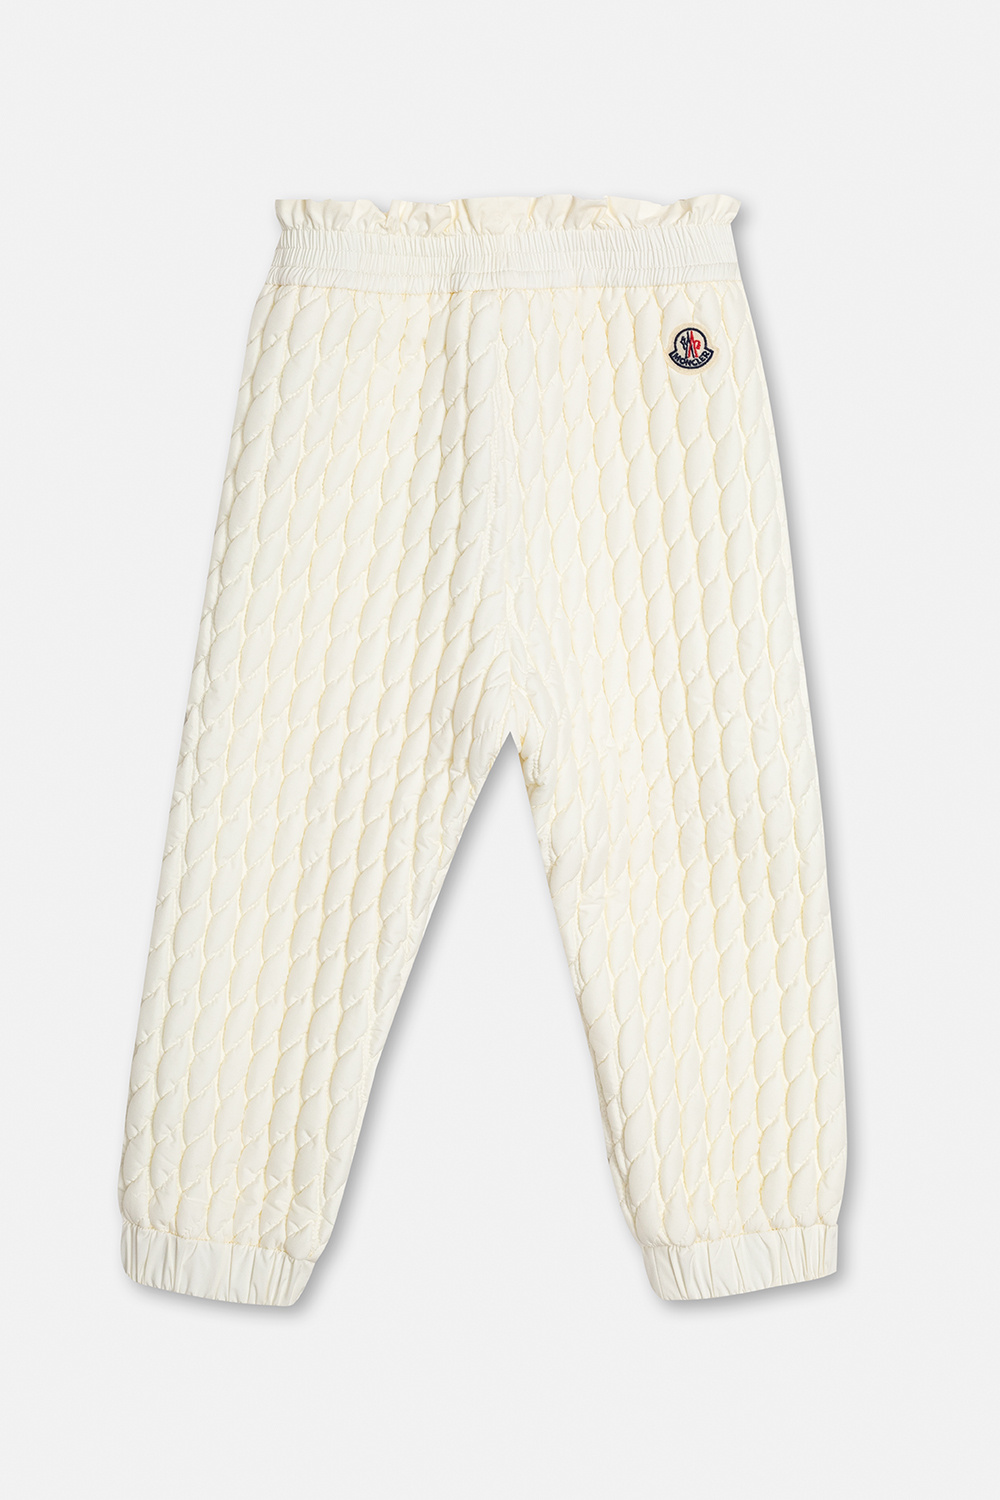 Moncler Enfant Insulated trousers